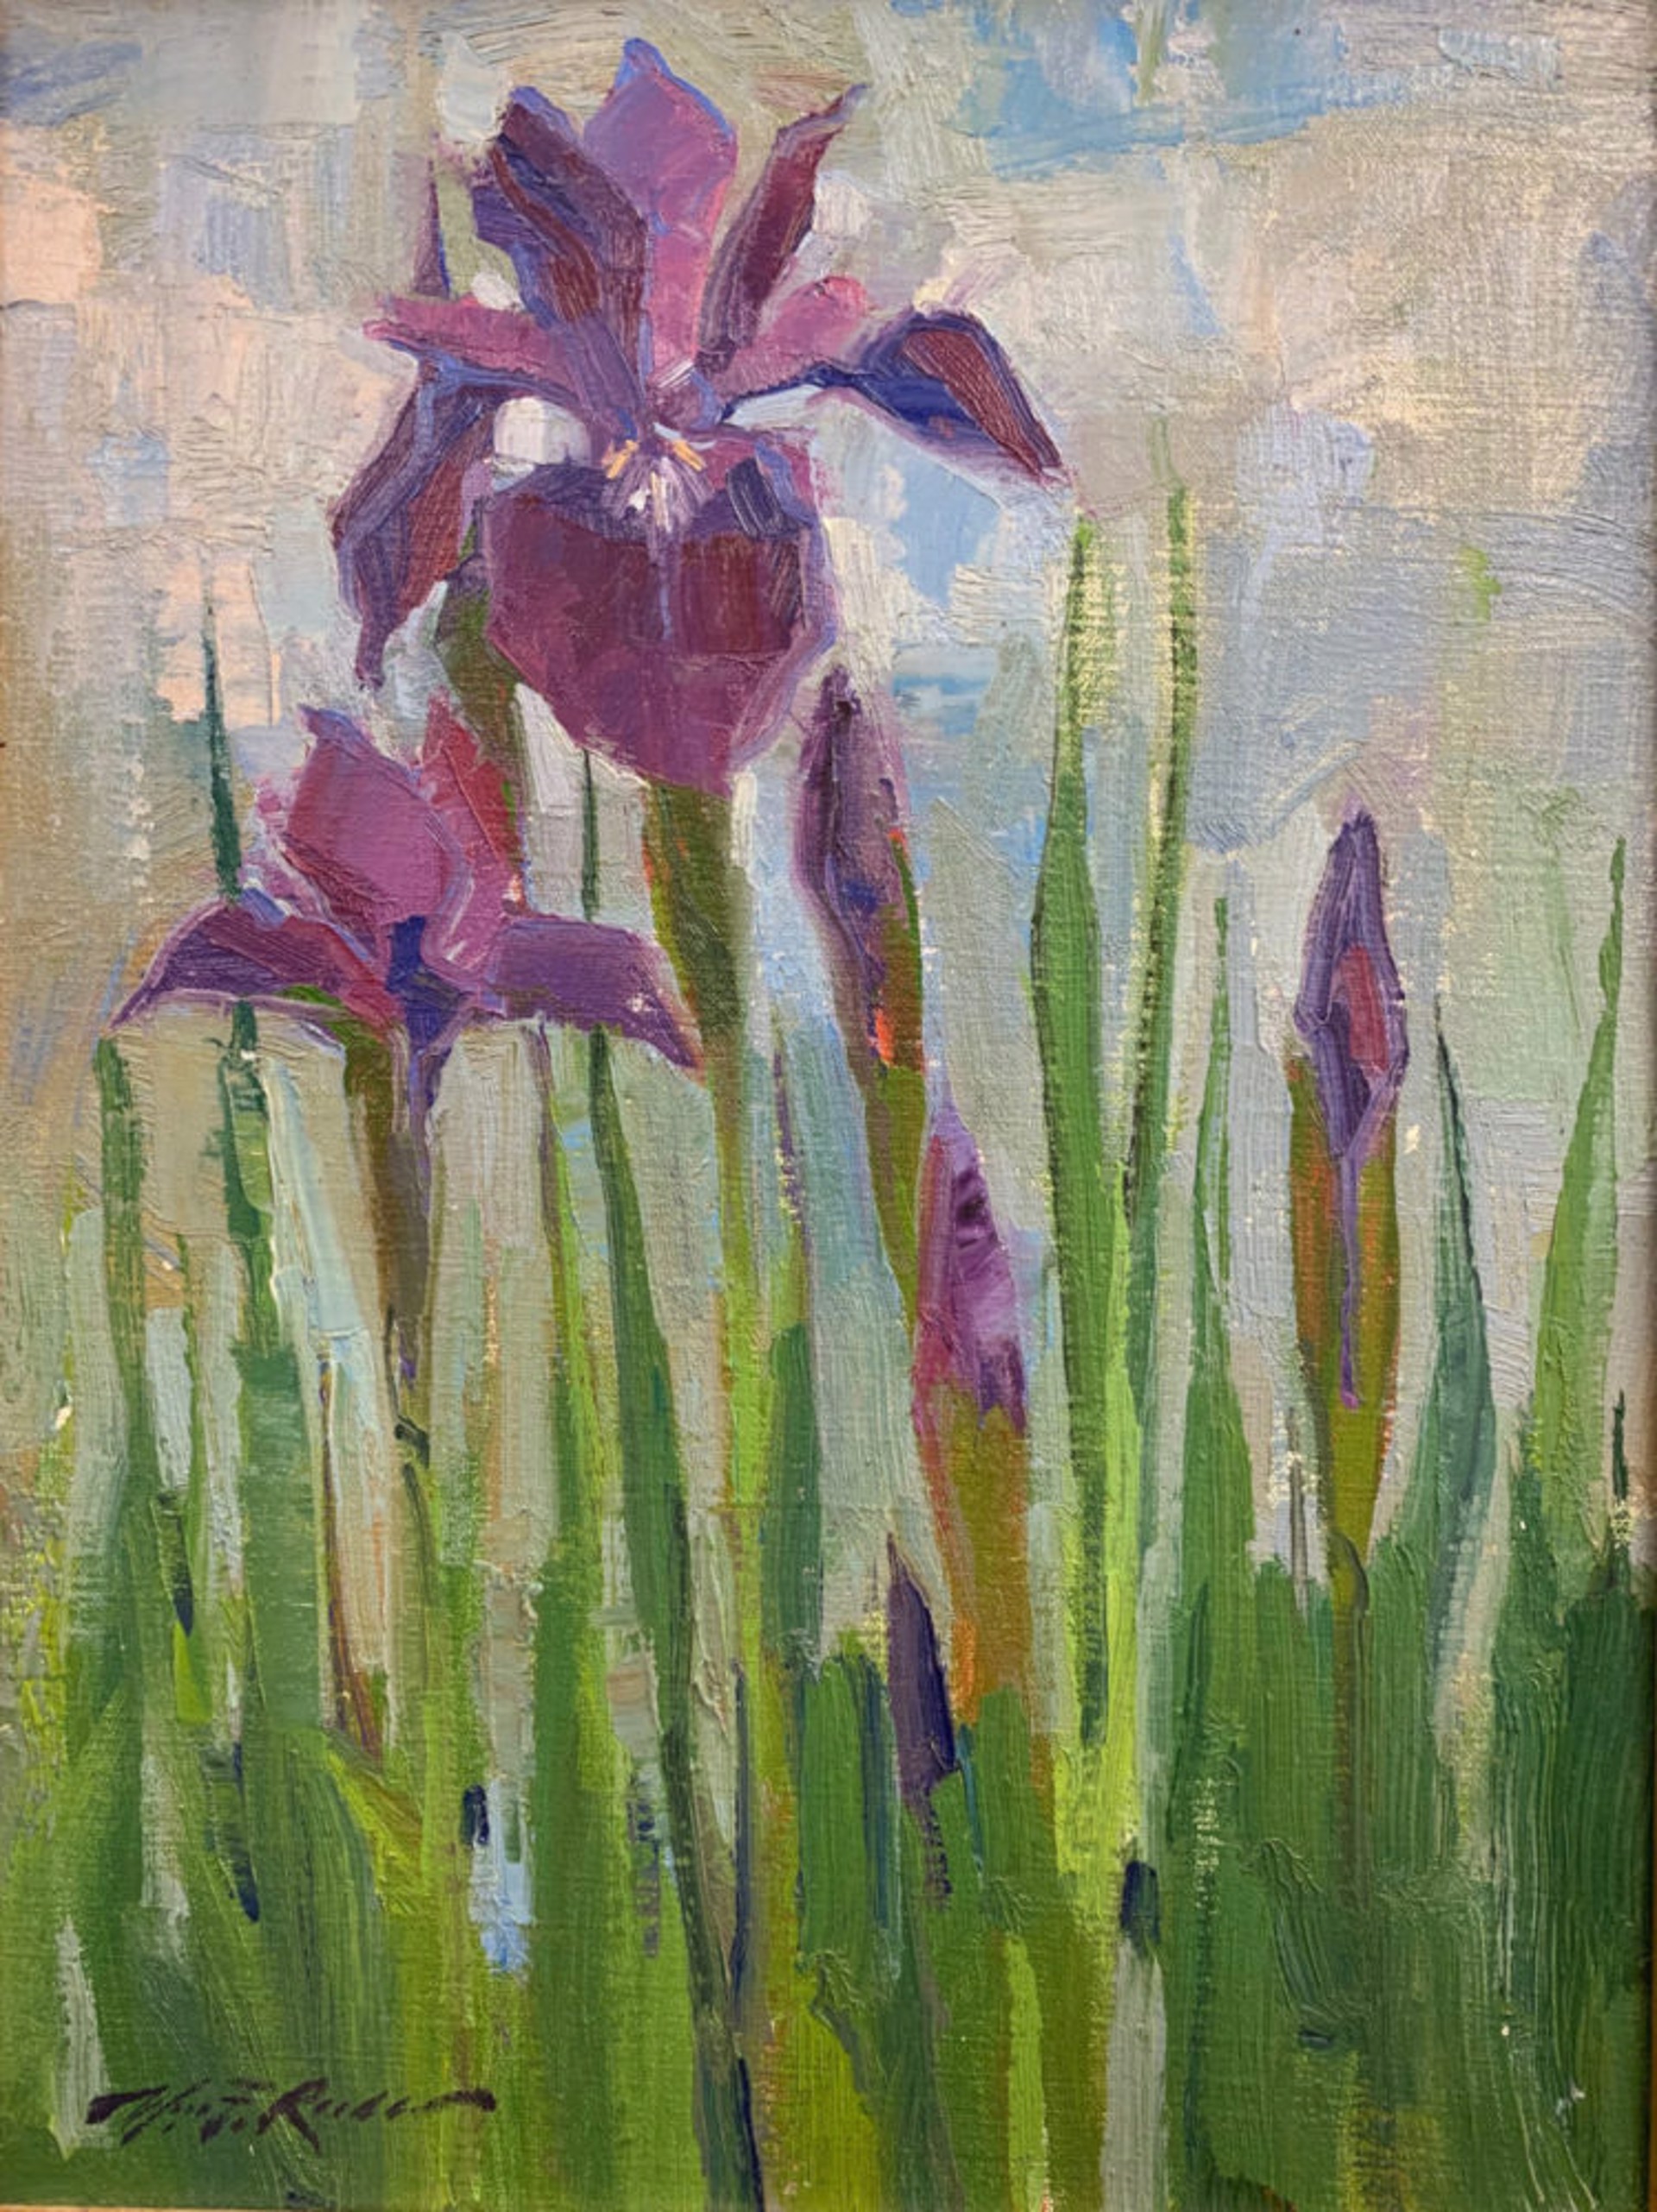 Fran’s Irises by William F. Reese